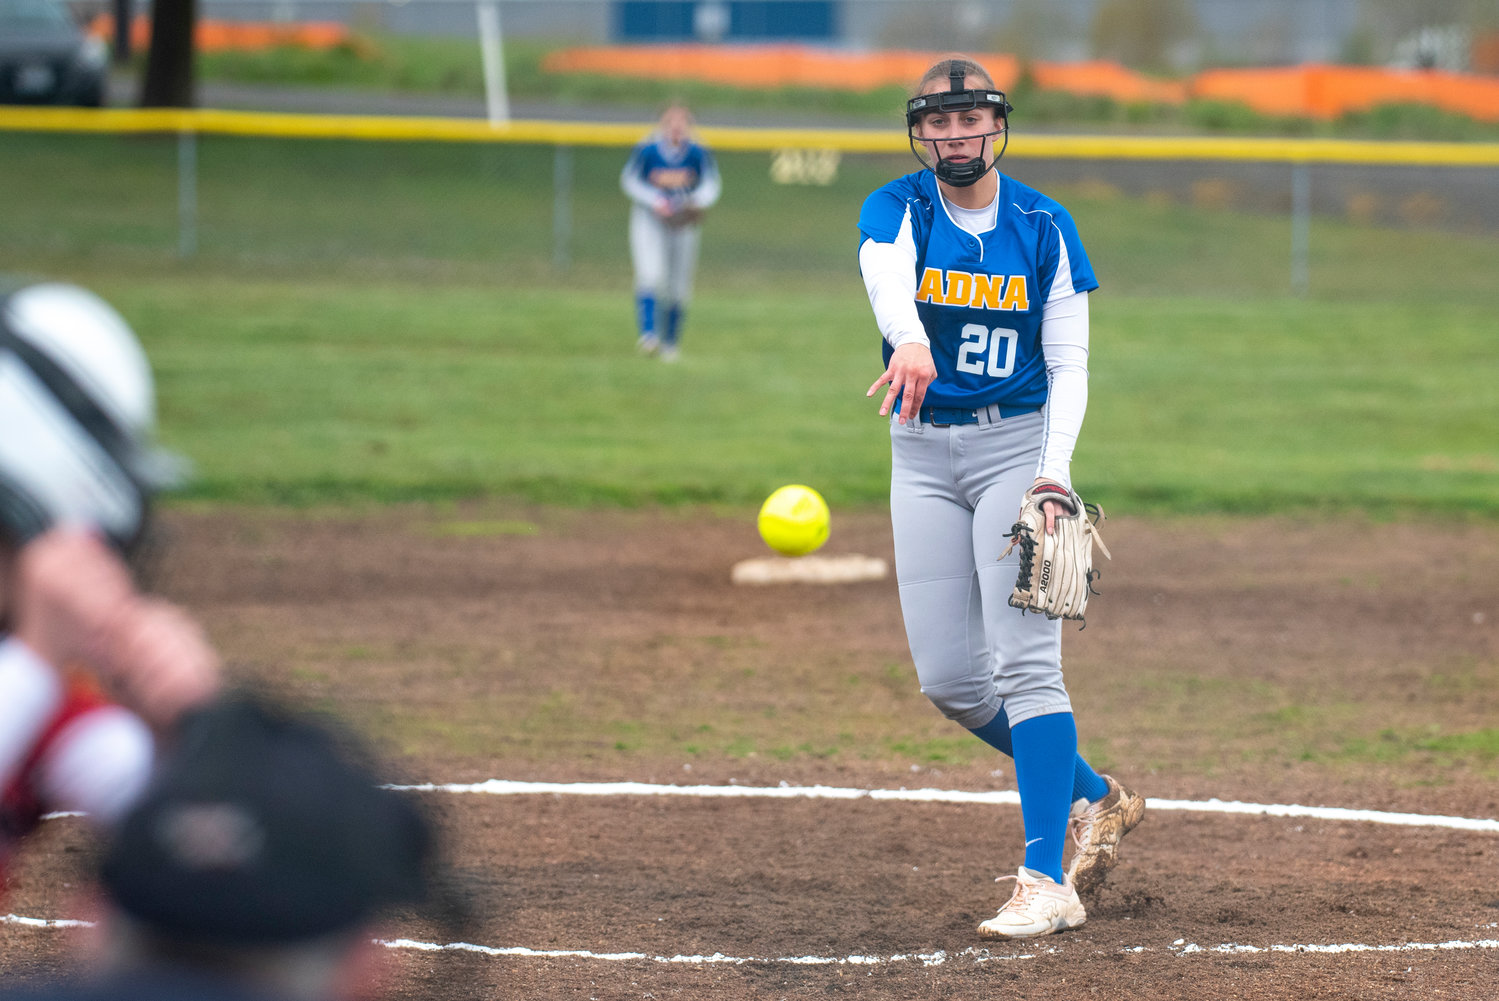 Adna's Karlee Von Moos tosses a pitch to a Winlock batter during a road game on April 20.